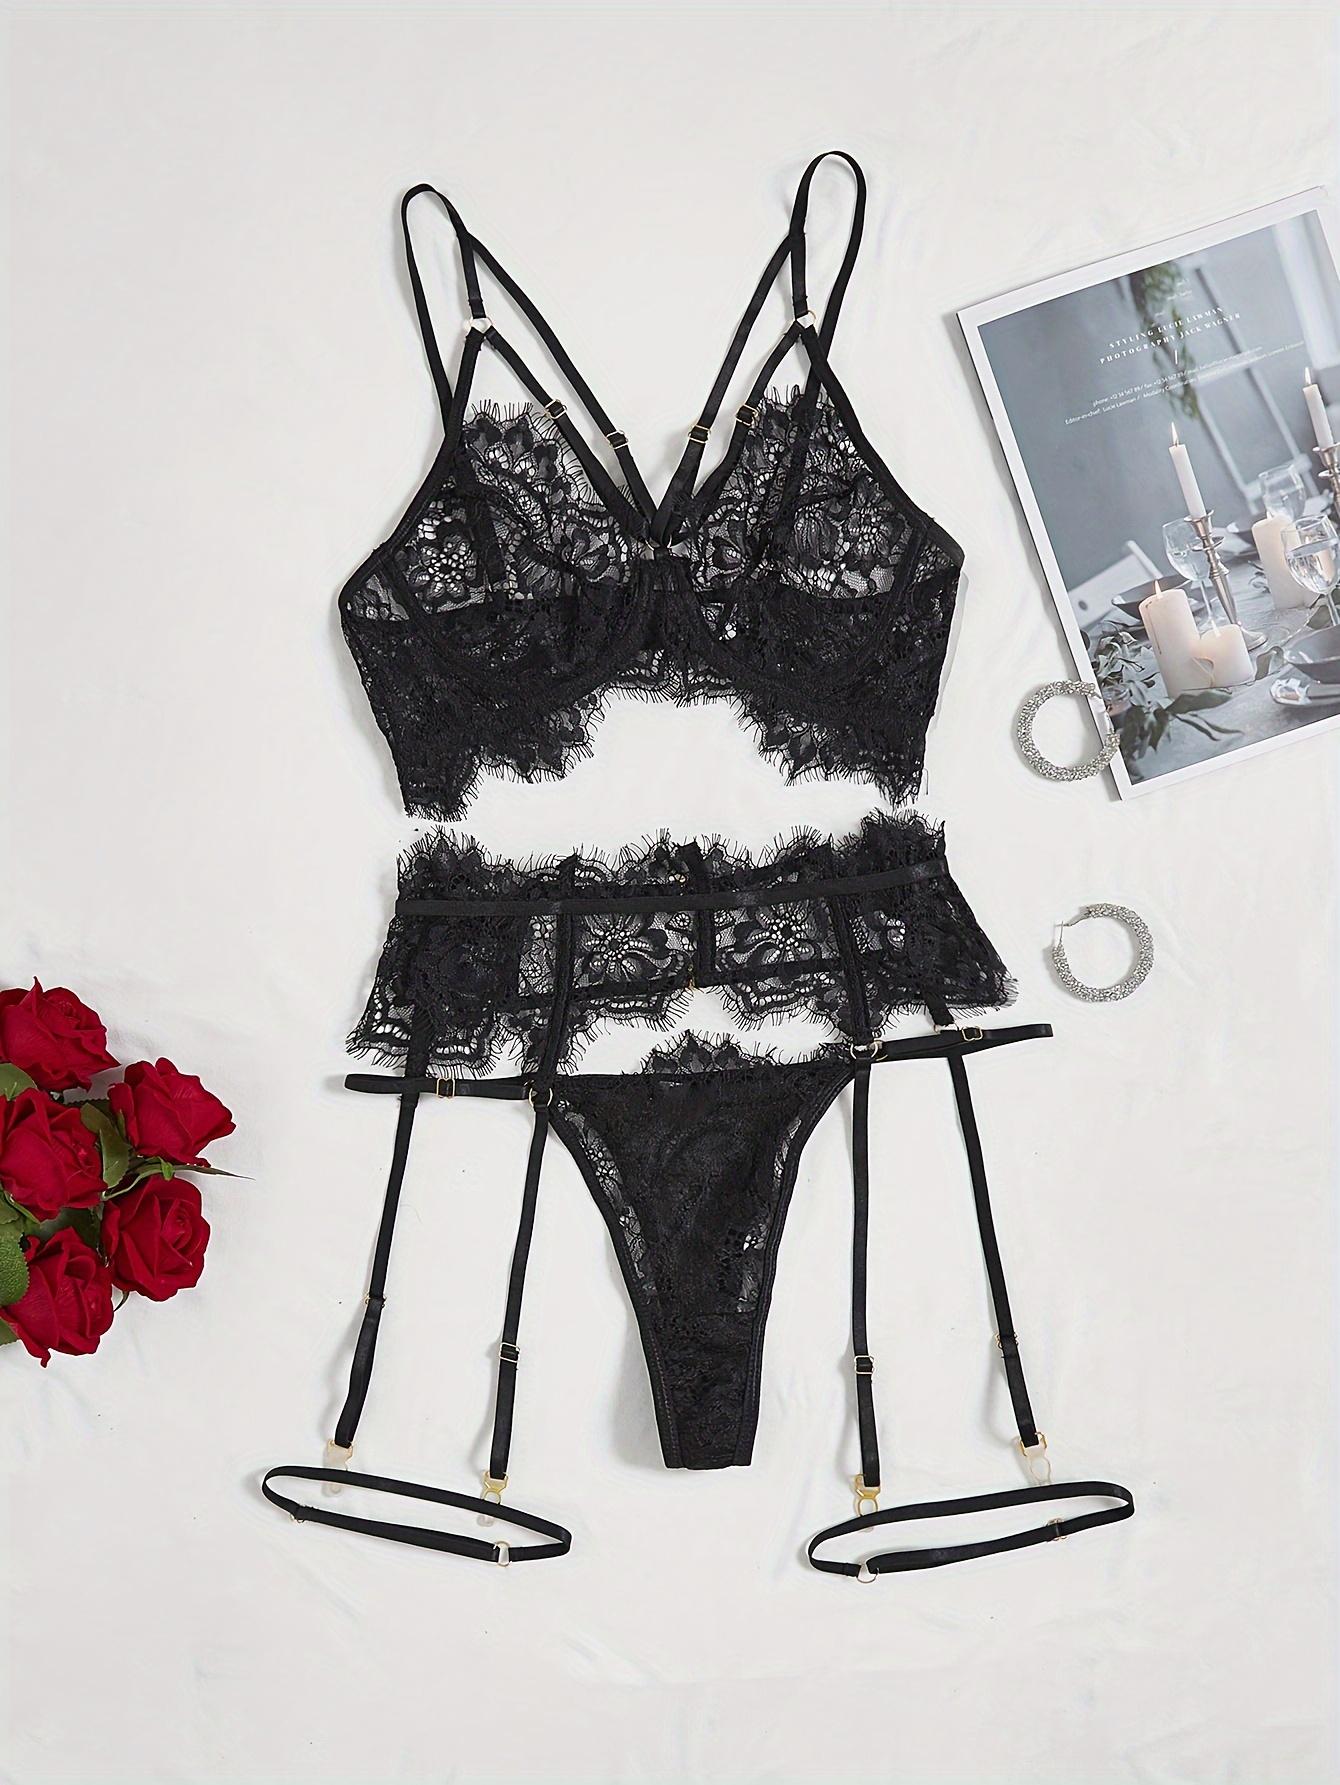 3 Pcs Seductive Floral Lace Lingerie Set With Hollow Out Bra, Garter Belt,  And G-String - Perfect For Women's Intimate Wear